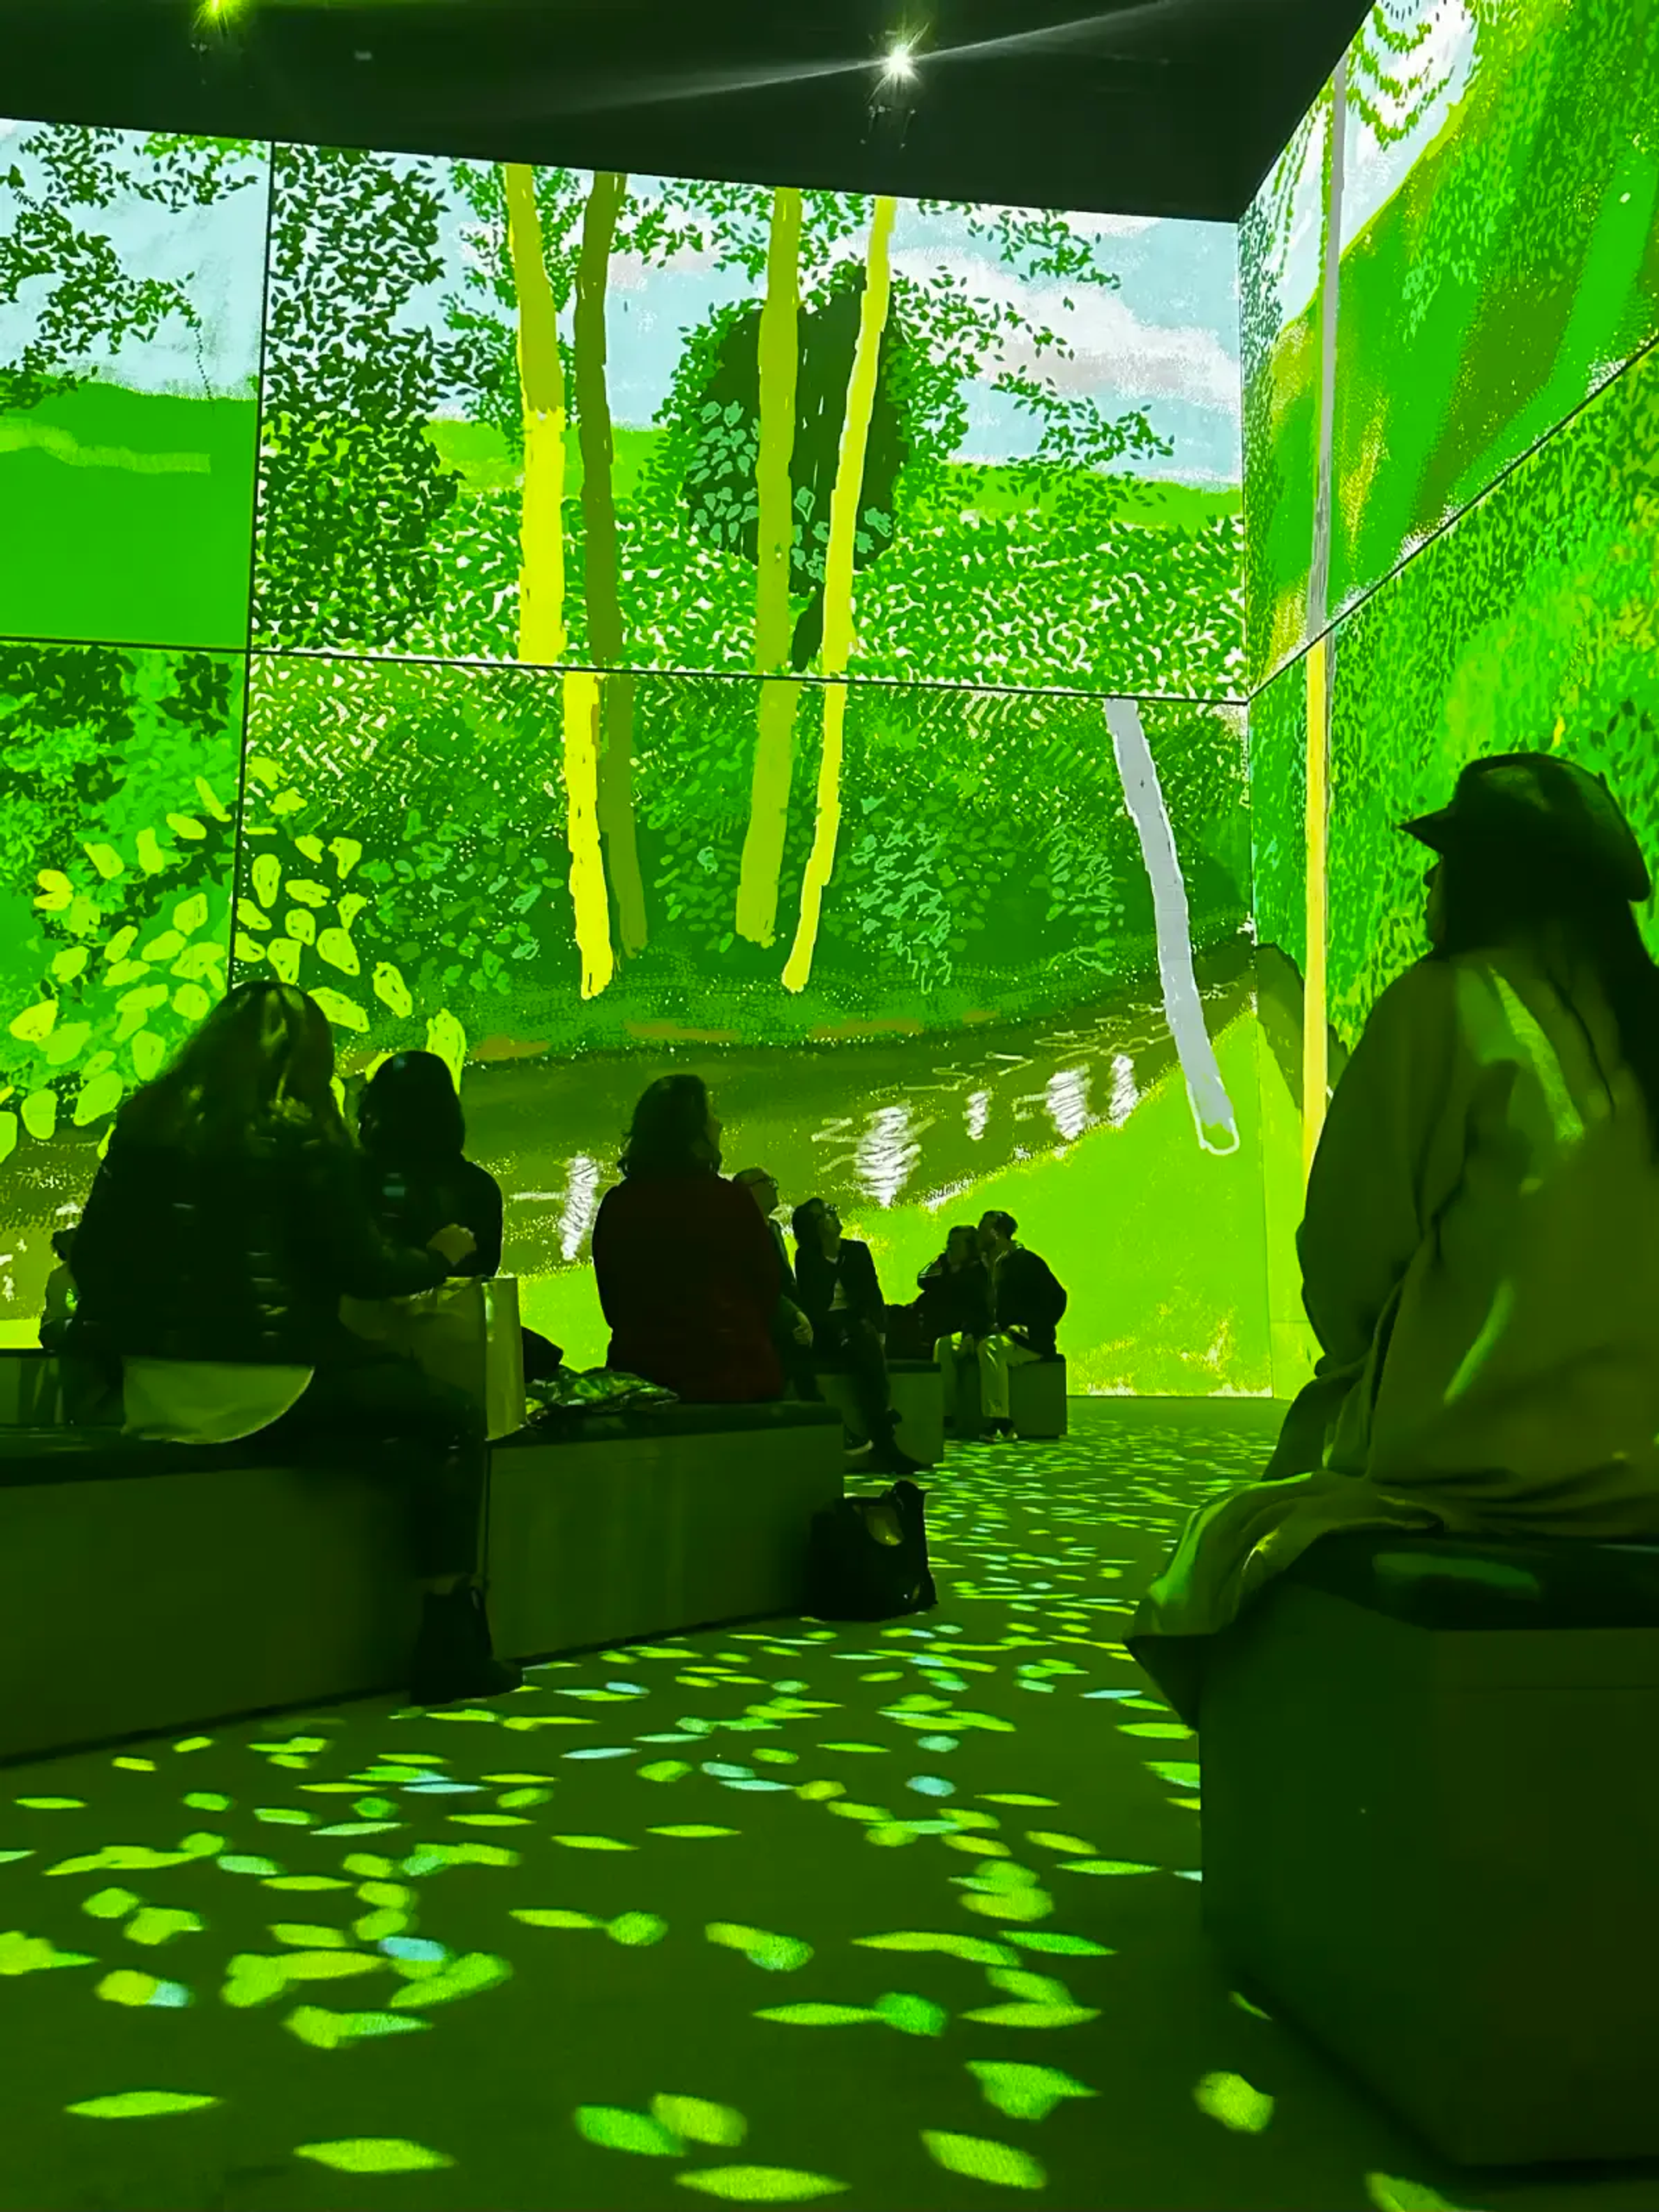 This photograph shows a group of people sitting down in the midst of an immersive art installation. The artwork by David Hockney is projected all around the room, including on the people themselves.